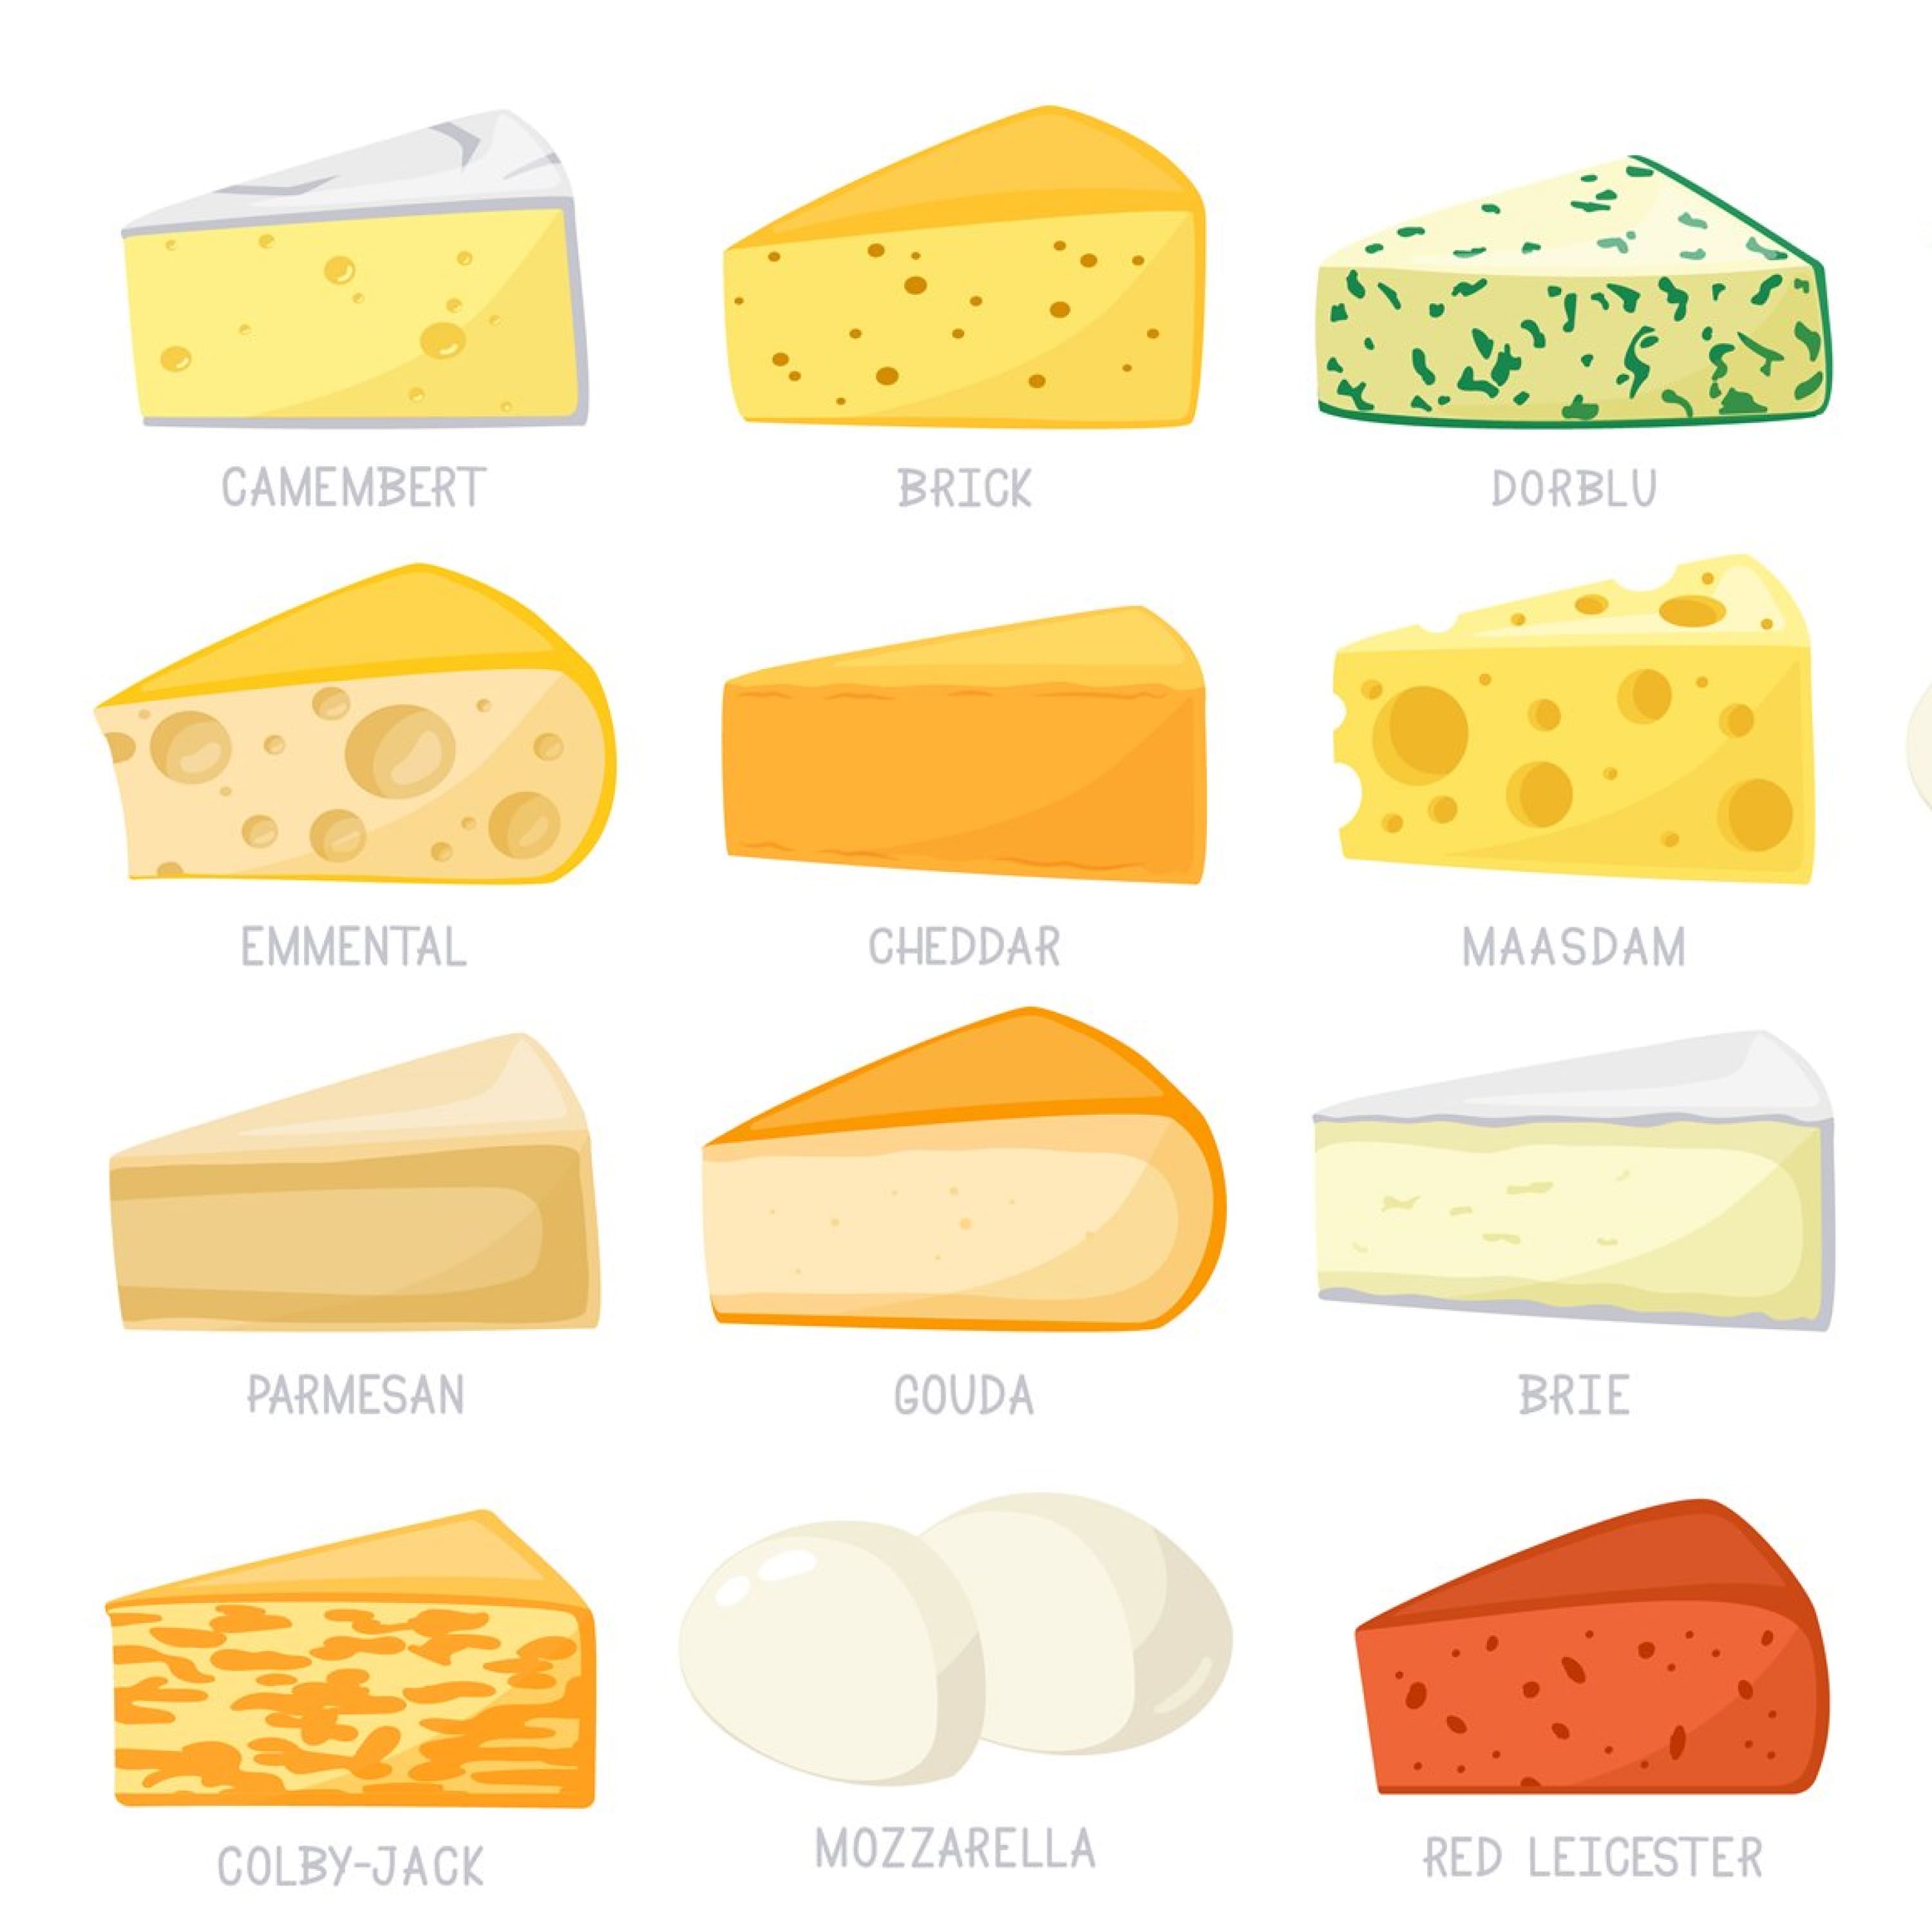 Cartoon image of different types of cheeses.